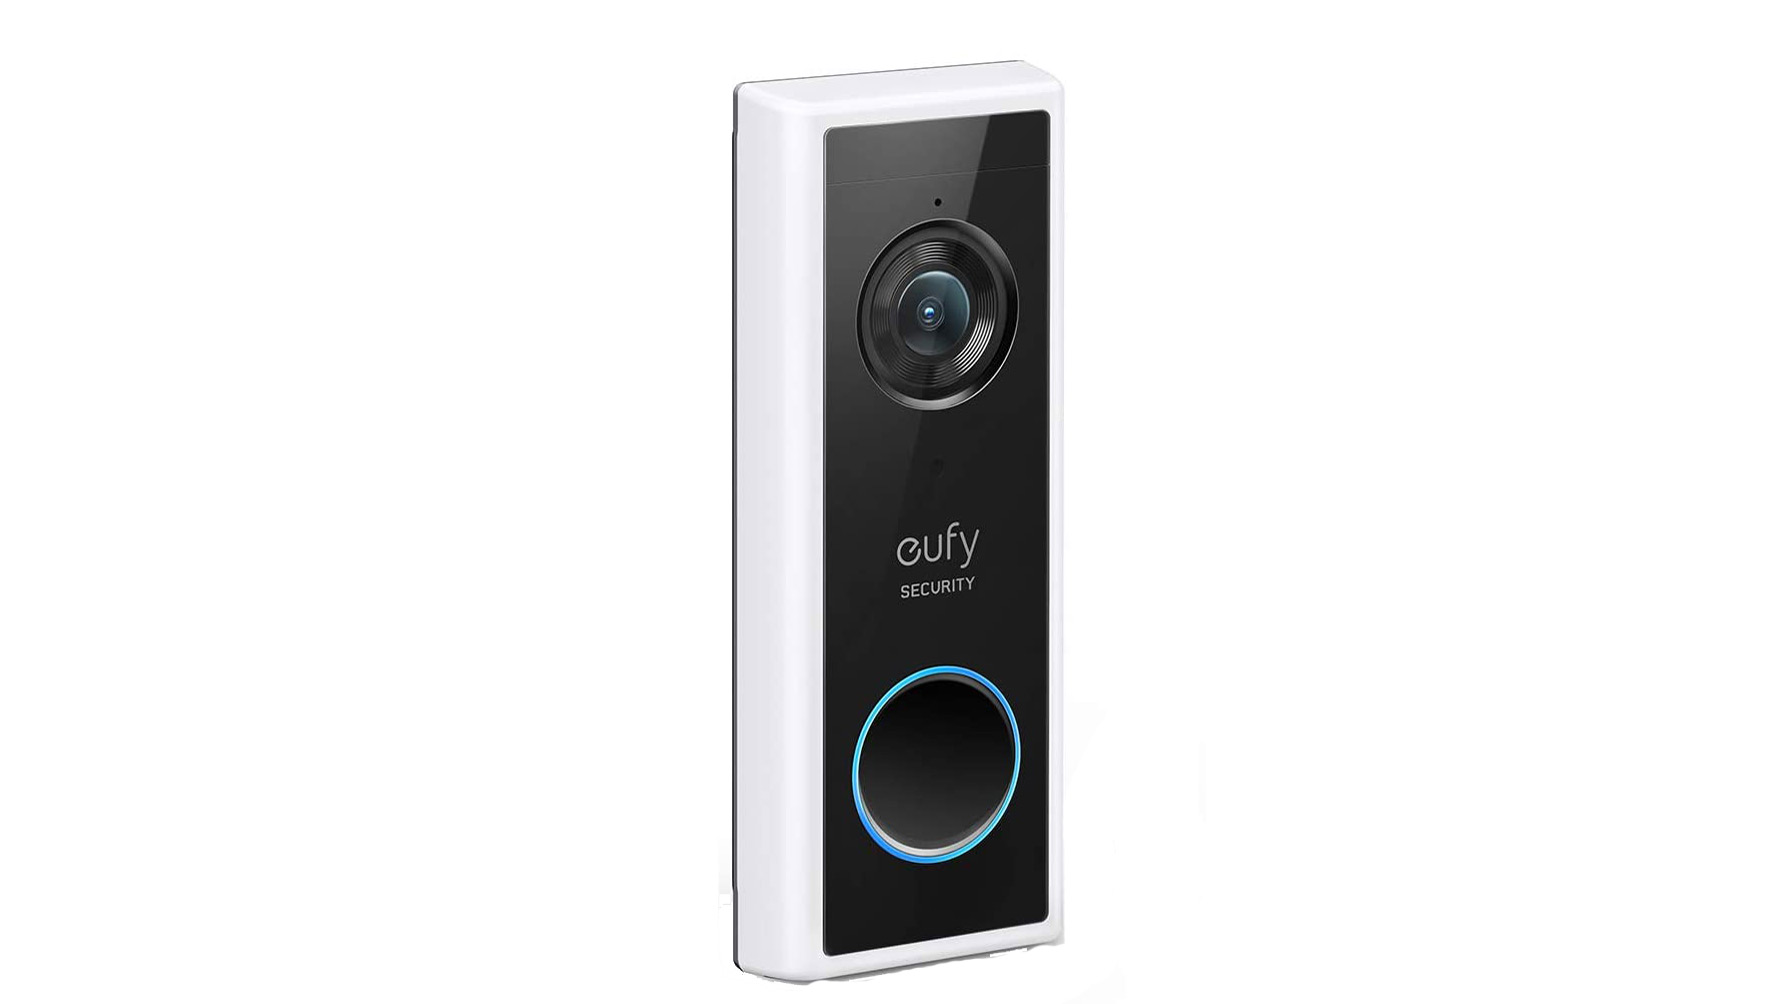 Eufy video doorbell 2k on a white background